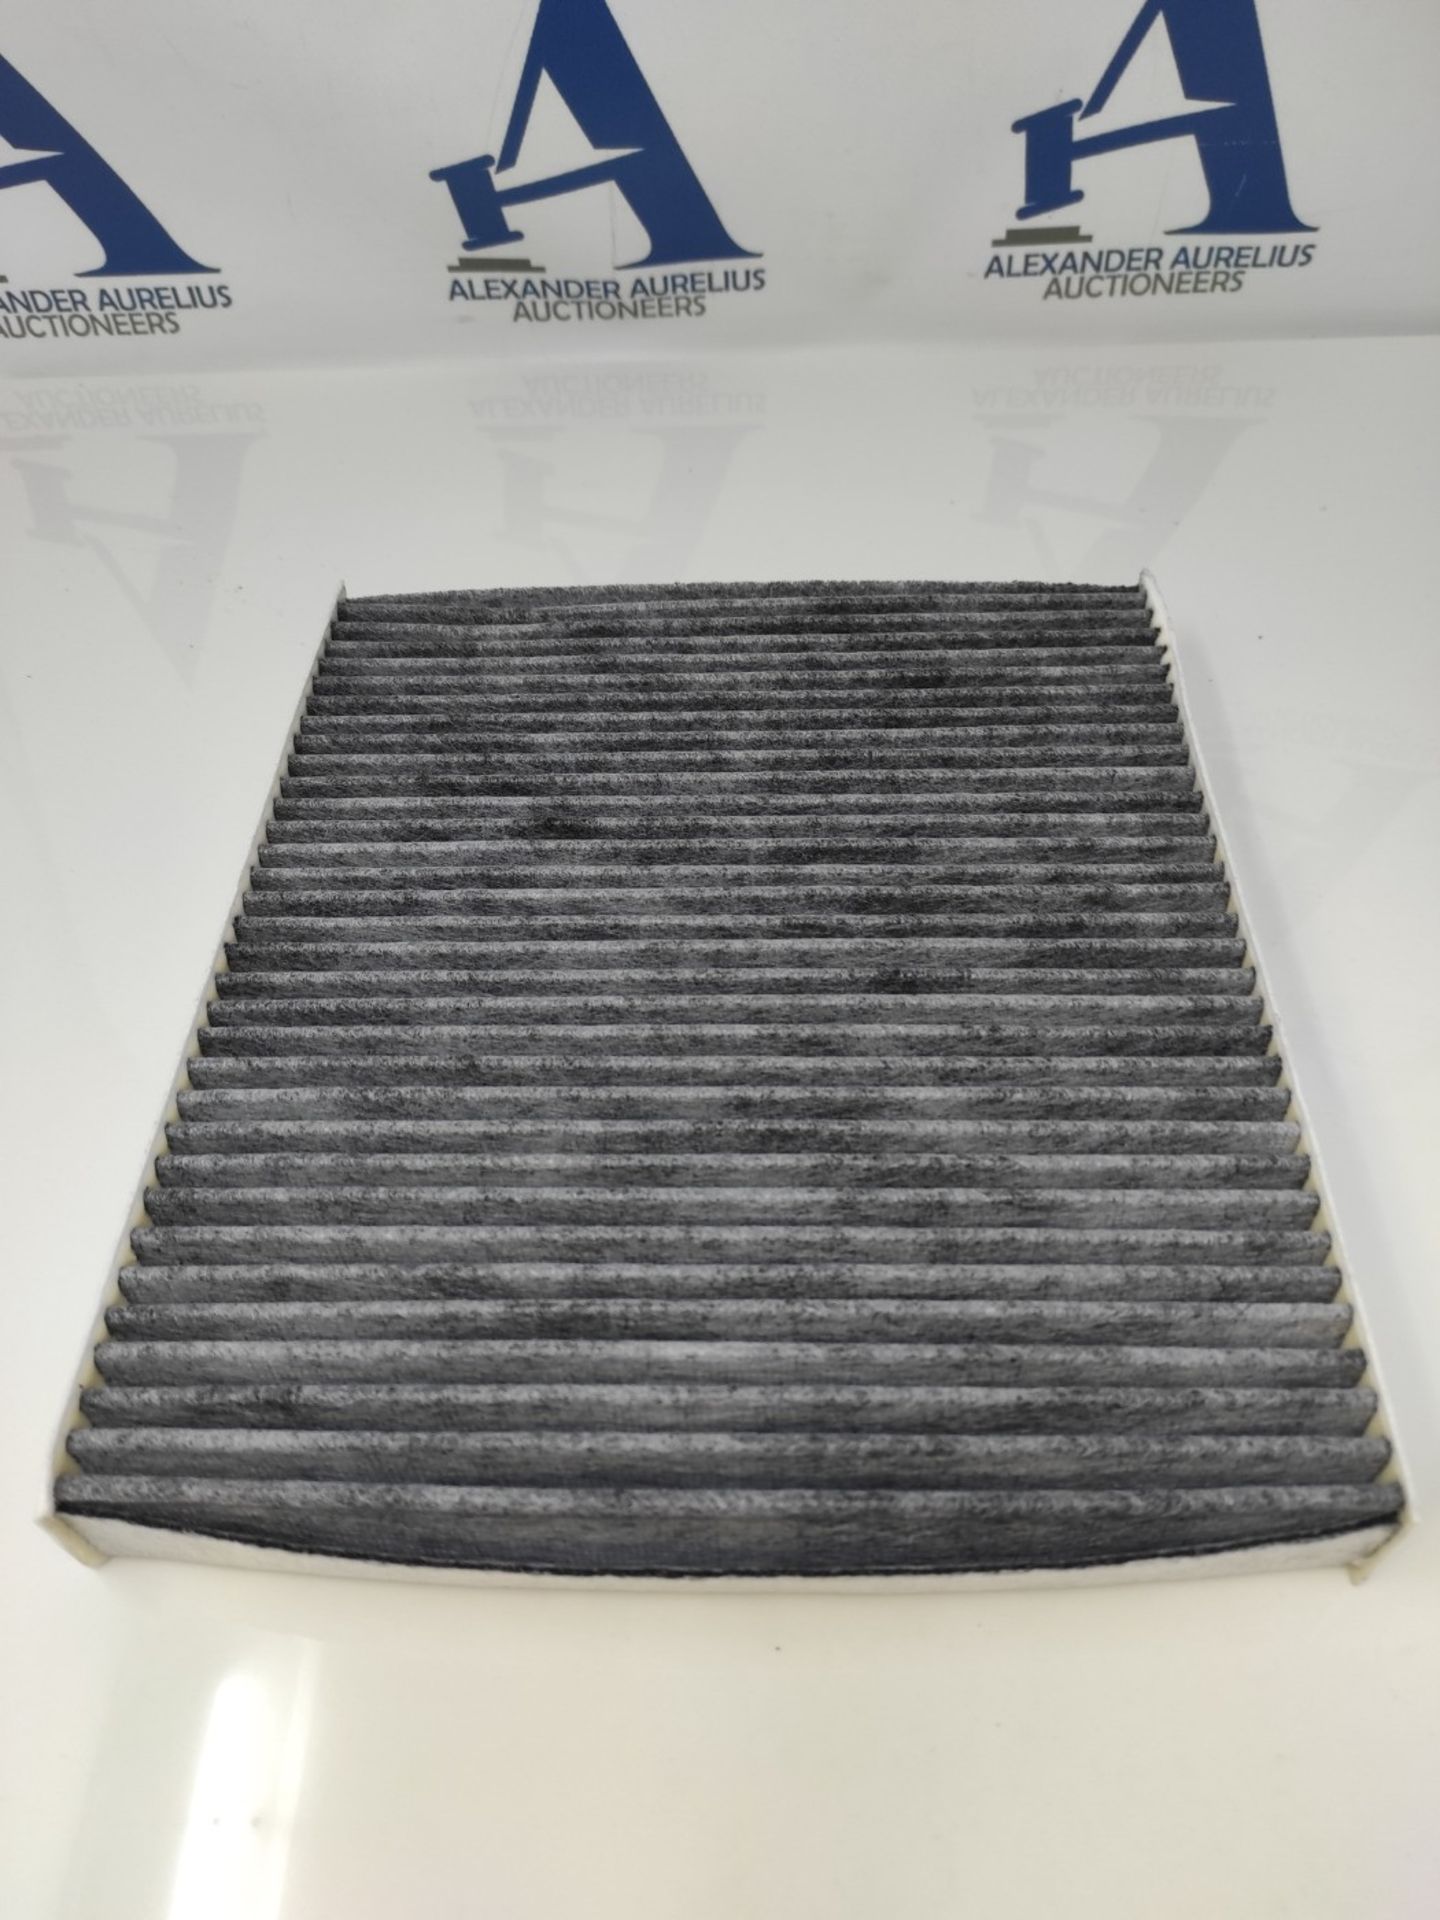 MANN-FILTER CUK 2545 Interior Filter - Pollen Filter with Activated Carbon - For Cars - Image 6 of 6